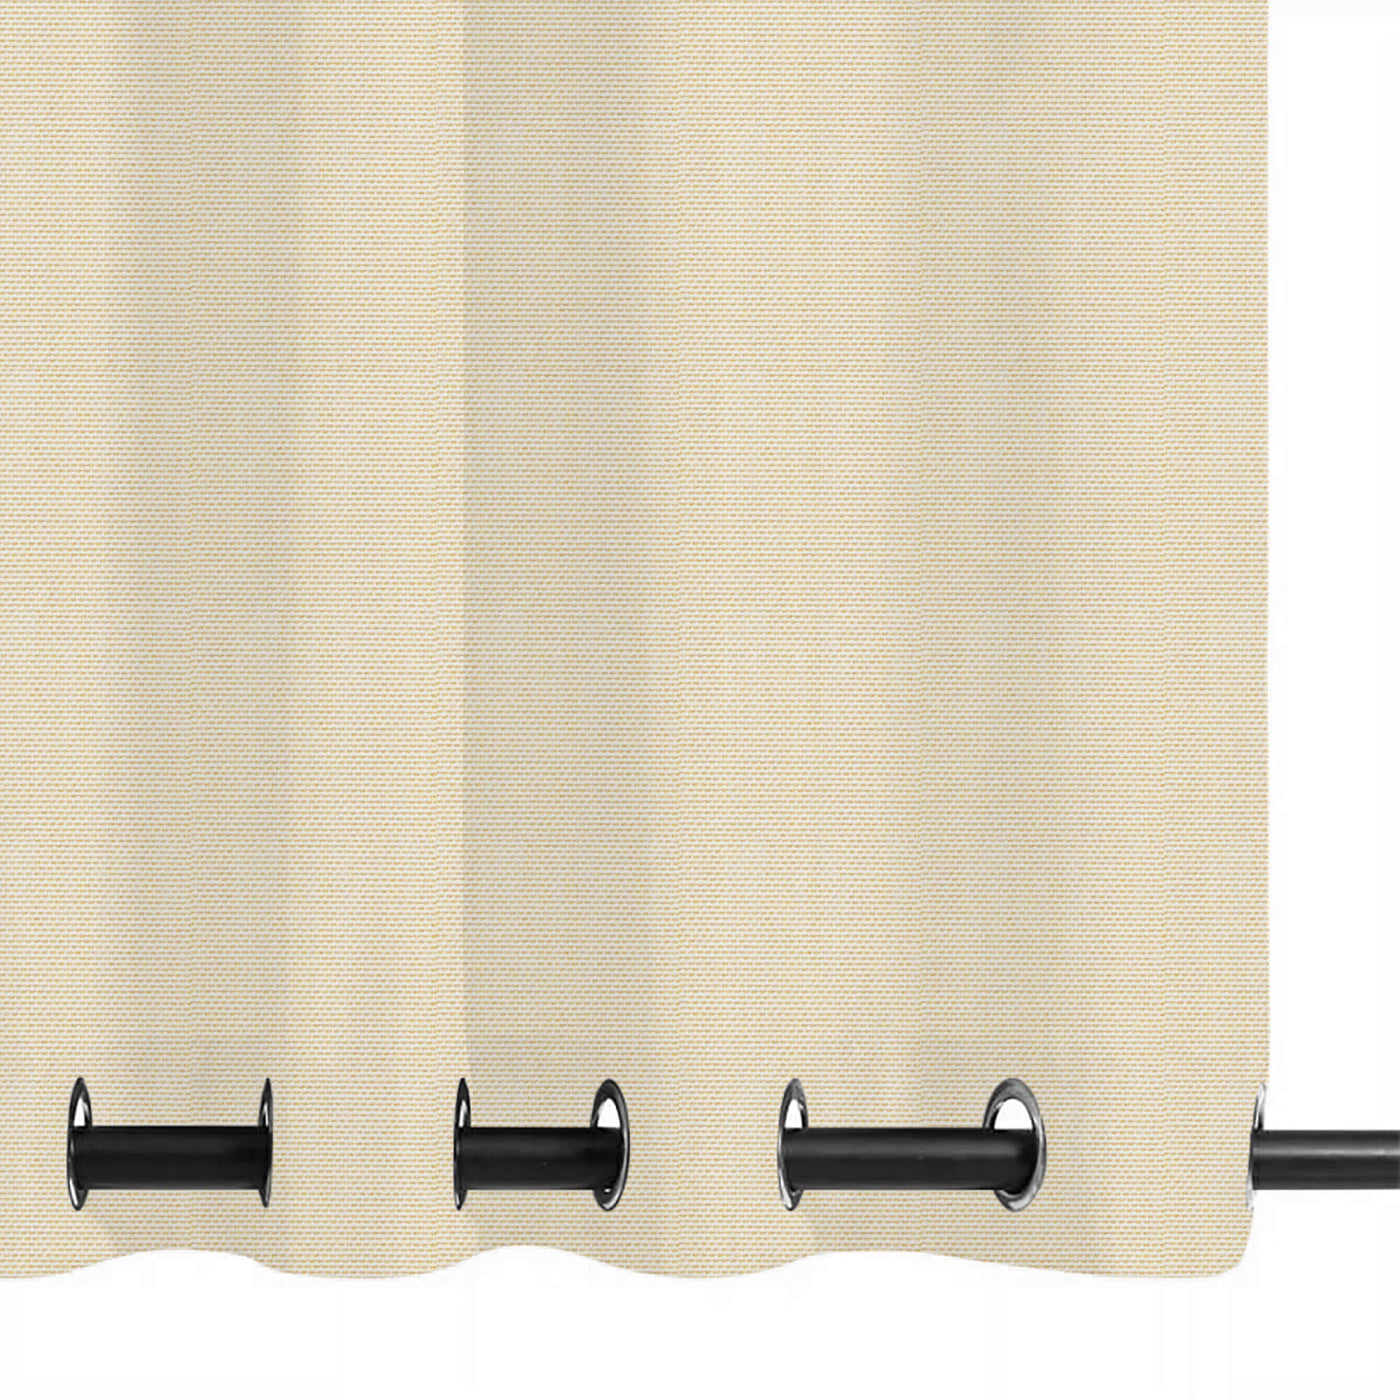 PENGI Outdoor Curtains Waterproof- Canvas River Sand